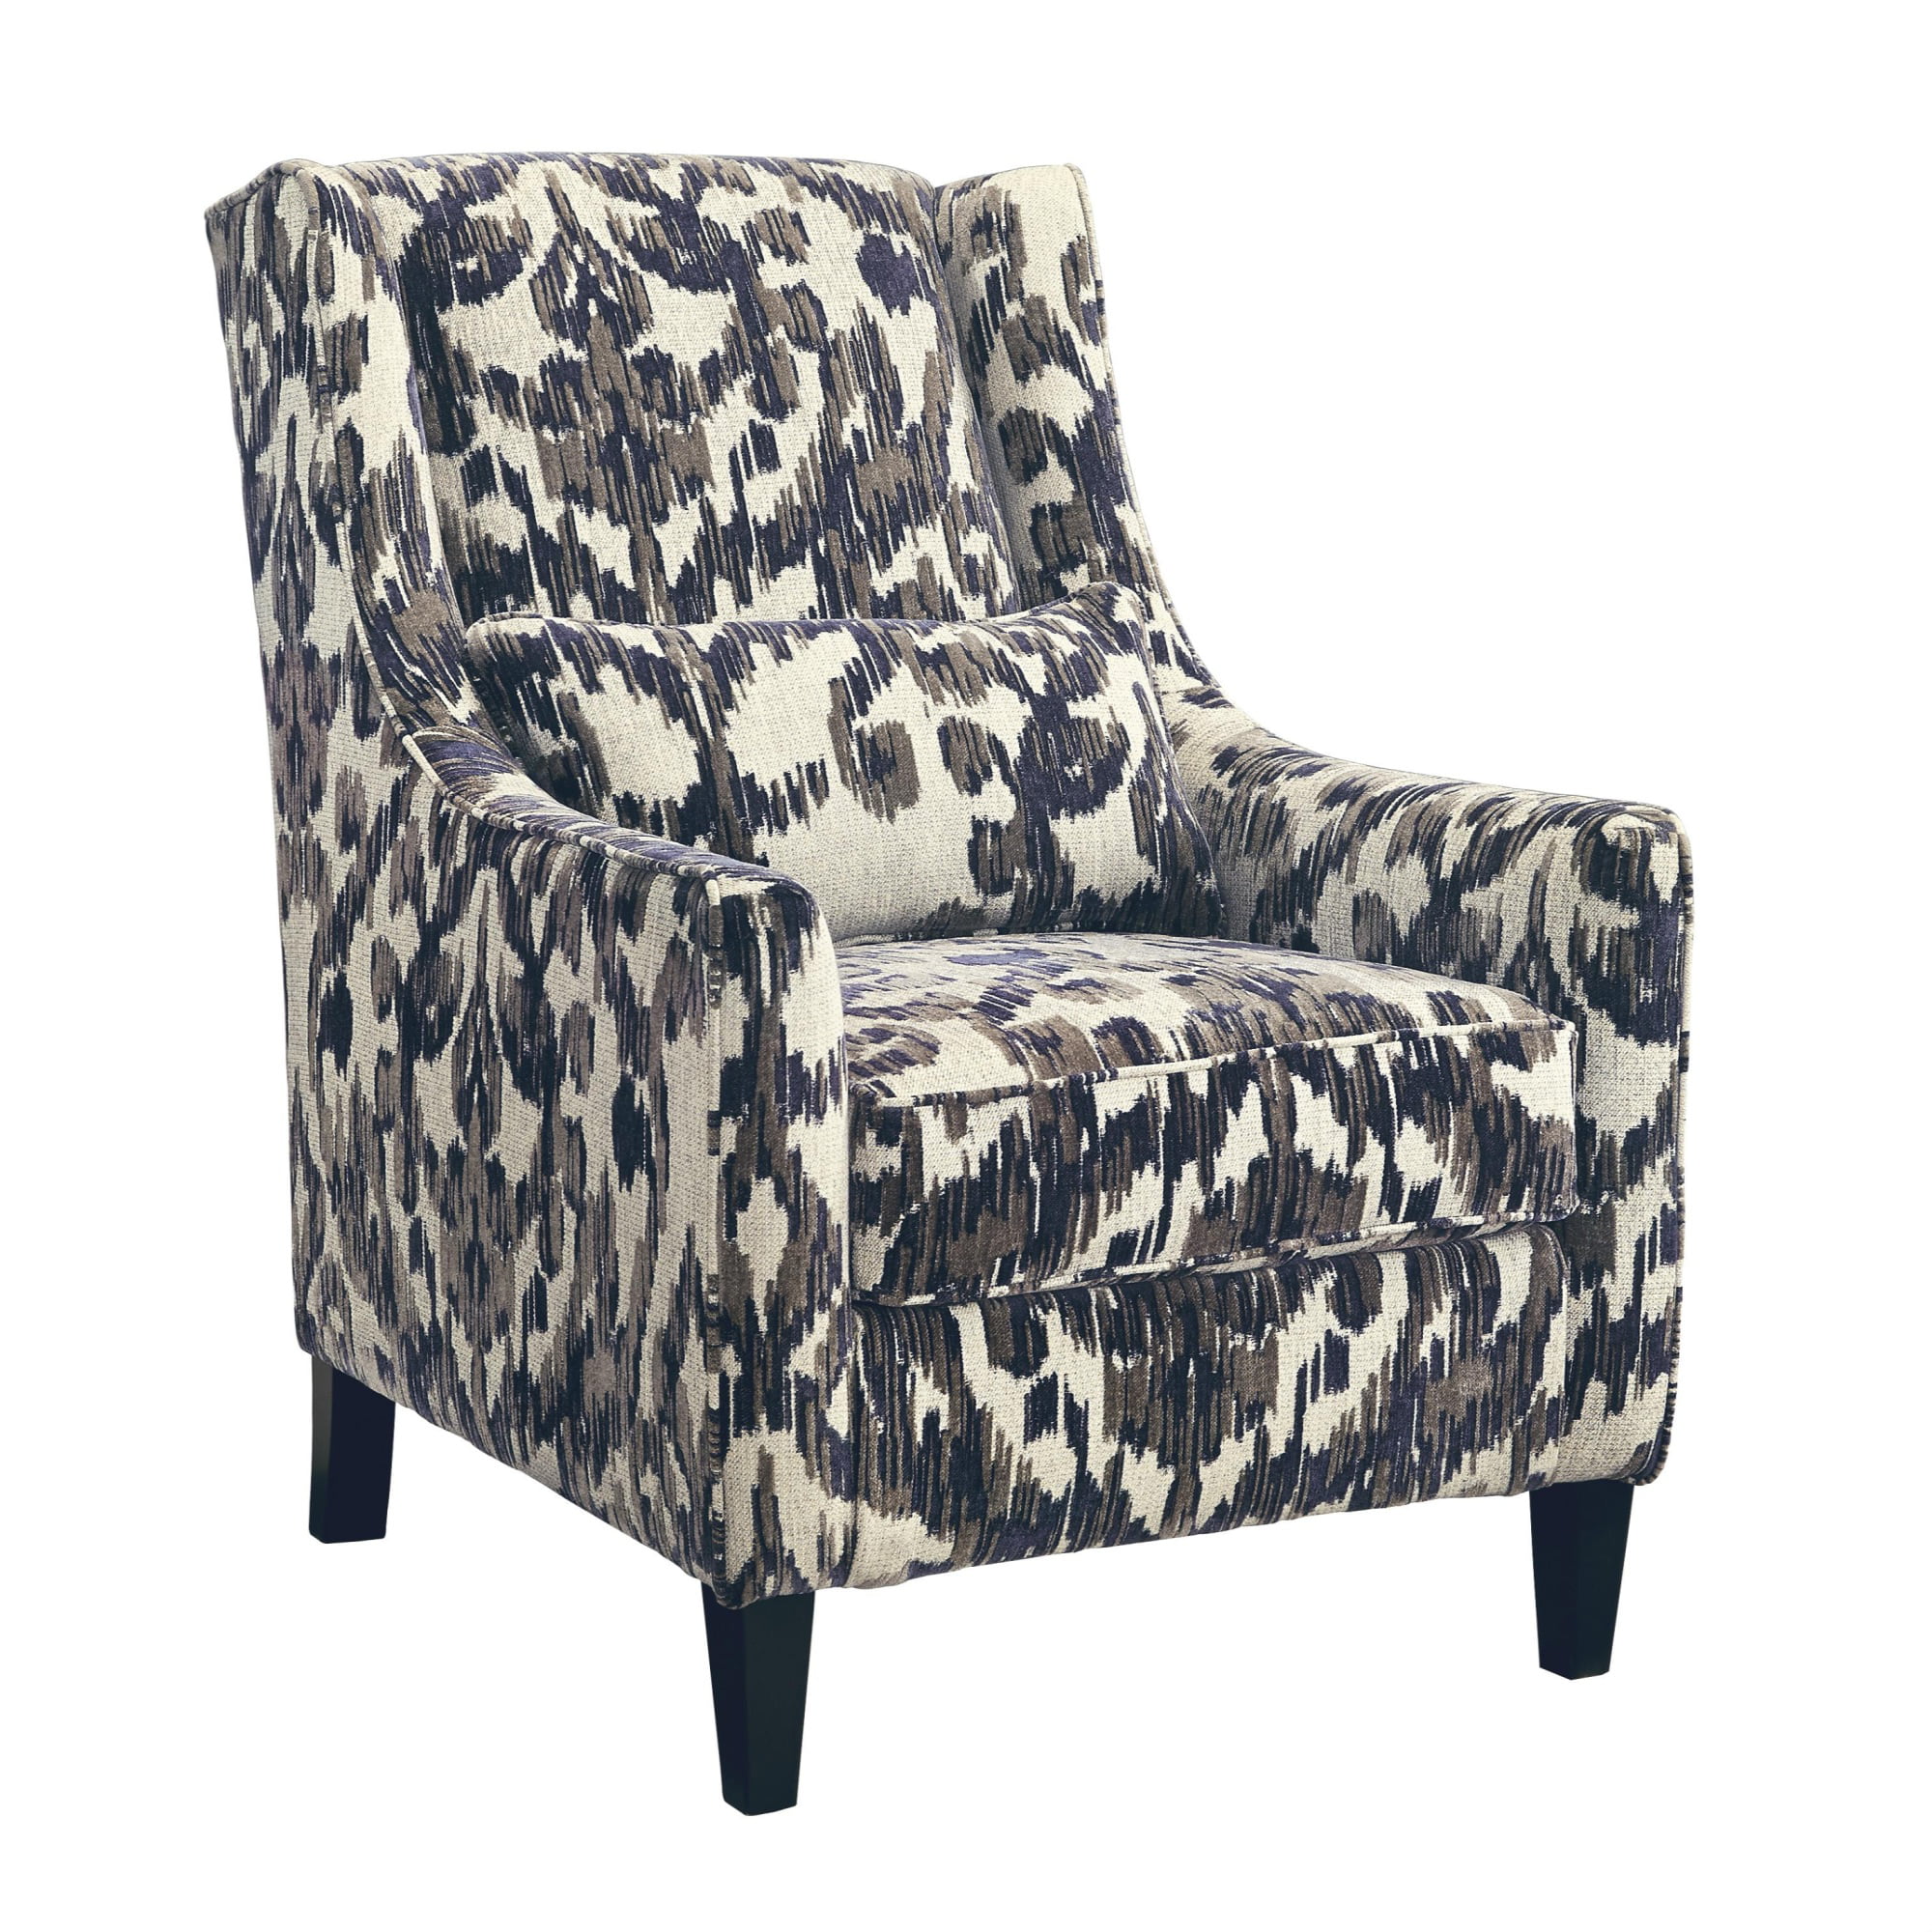 Fabric Upholstered Wooden Accent Chair with Cow Hide Print